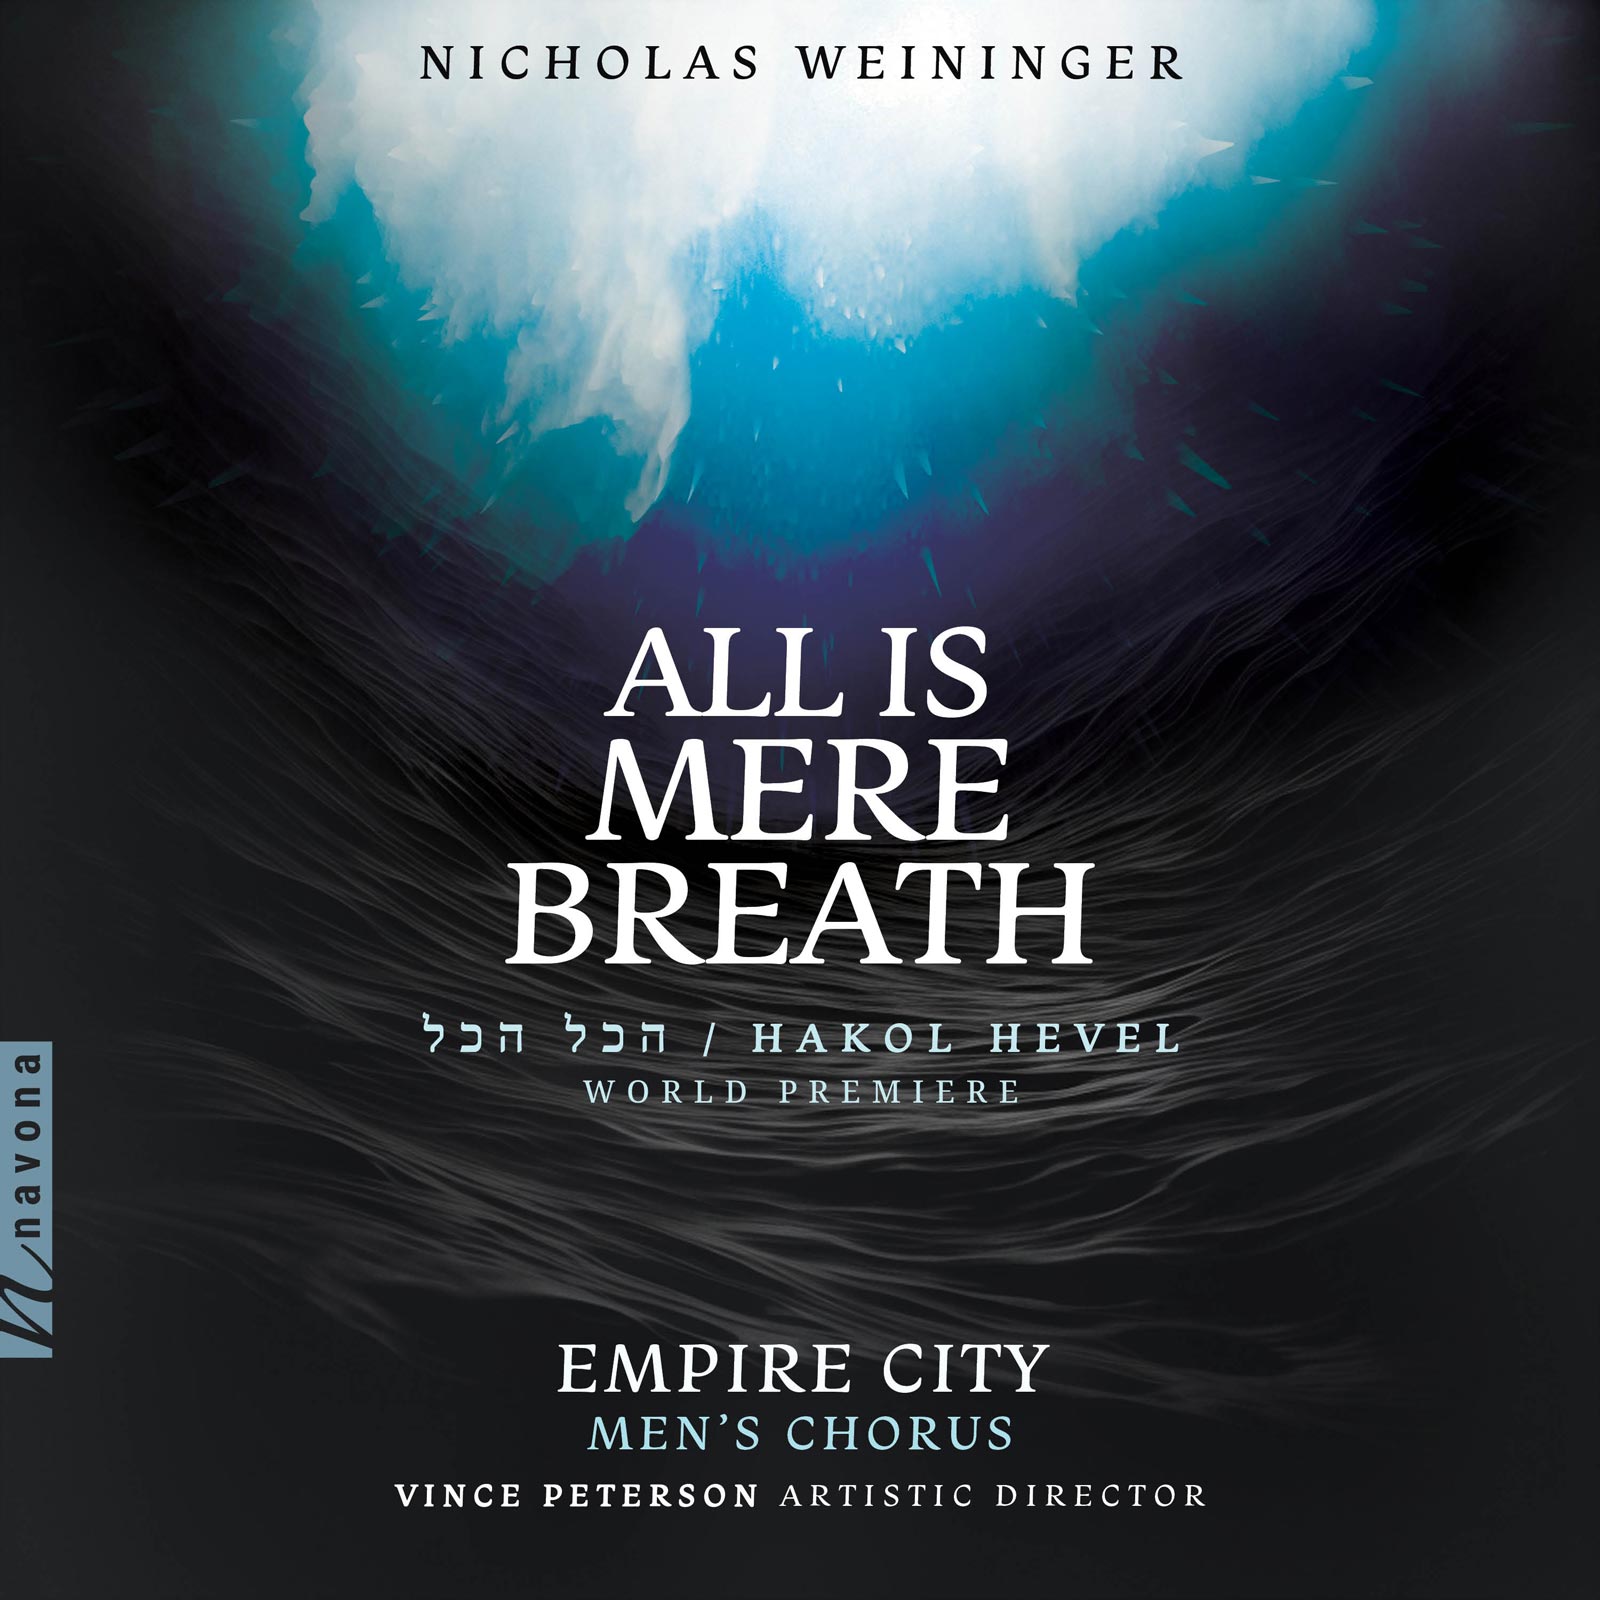 Review of WEININGER All is Mere Breath